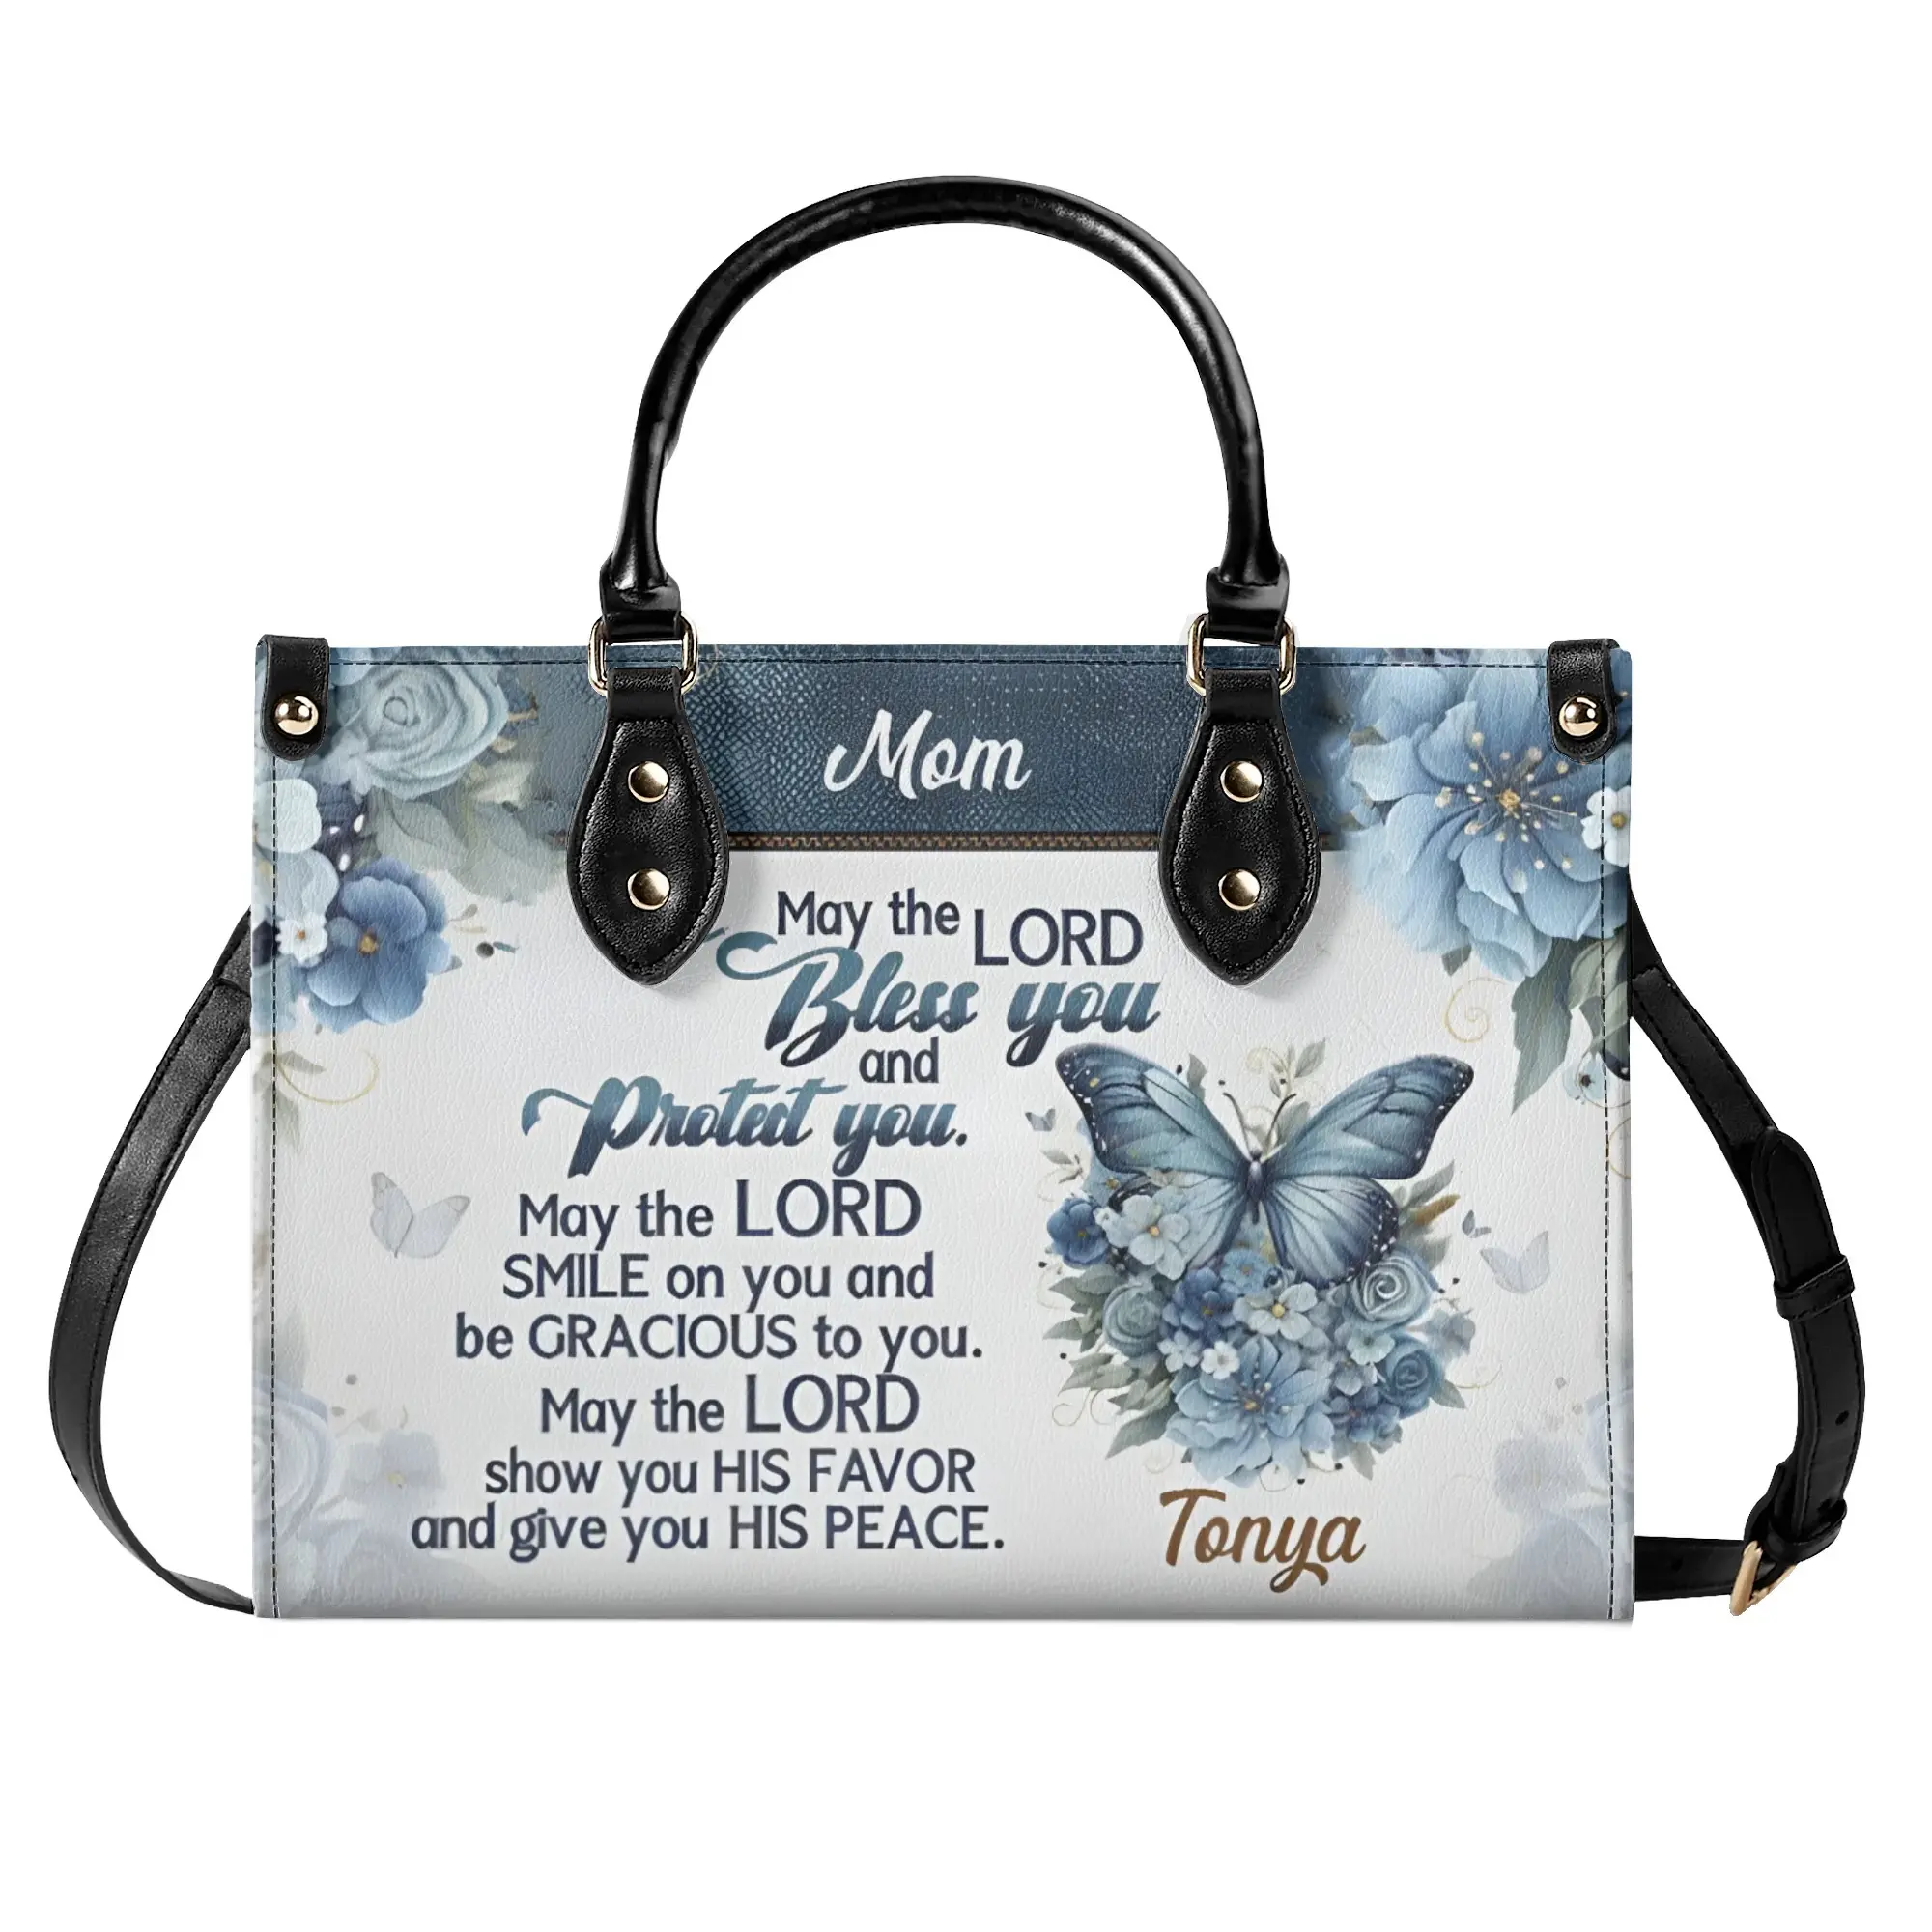 Personalized Leather Handbag May The Lord Bless You